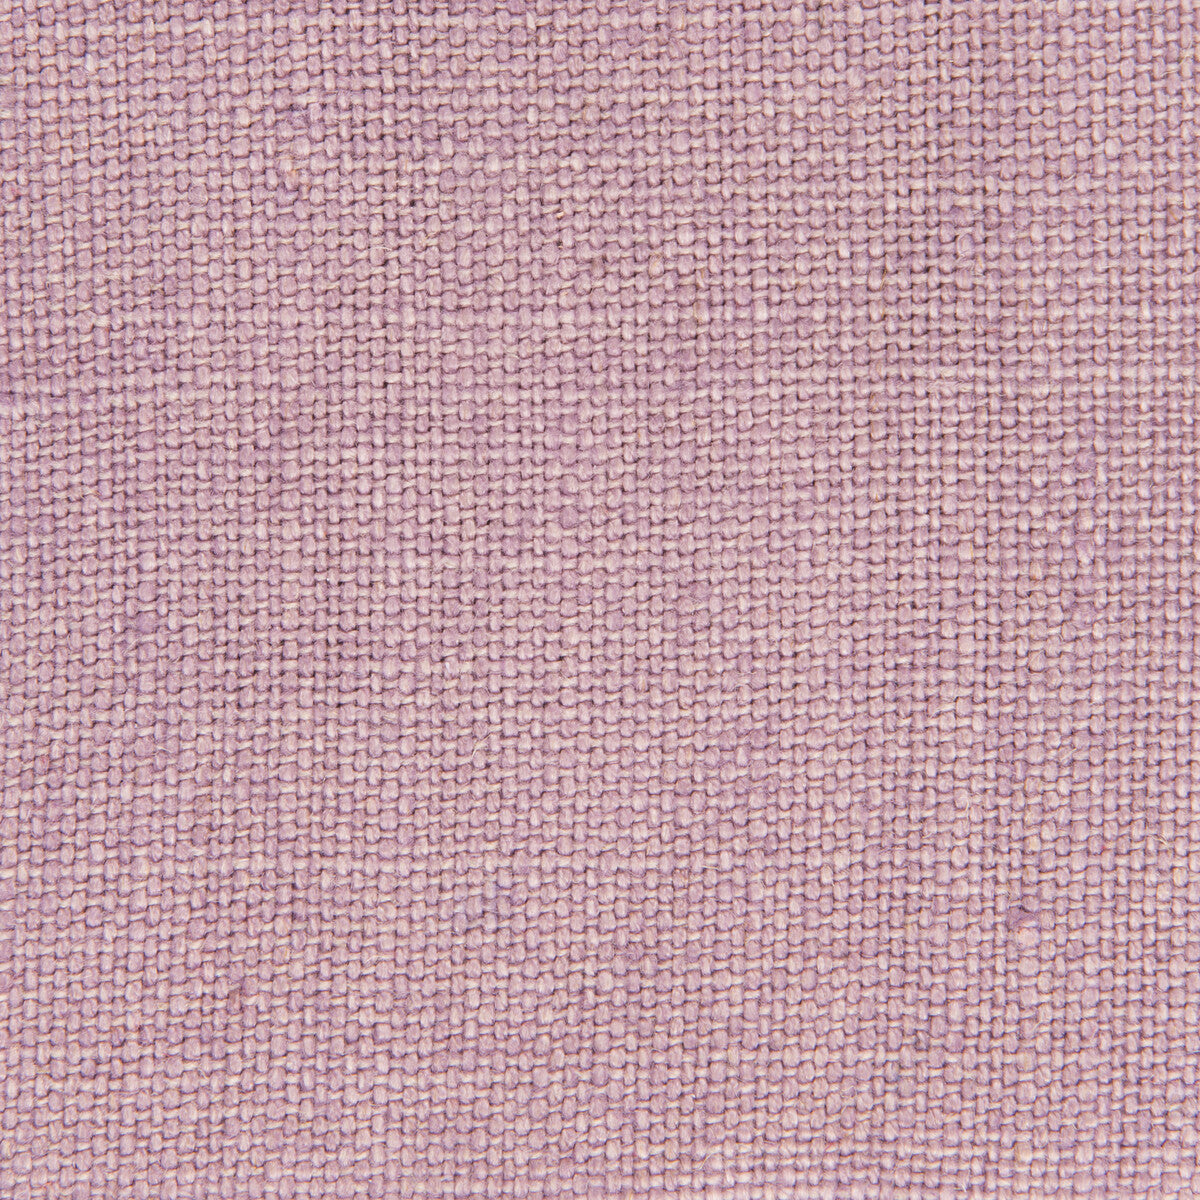 Nicaragua fabric in lavanda color - pattern GDT5239.001.0 - by Gaston y Daniela in the Basics collection